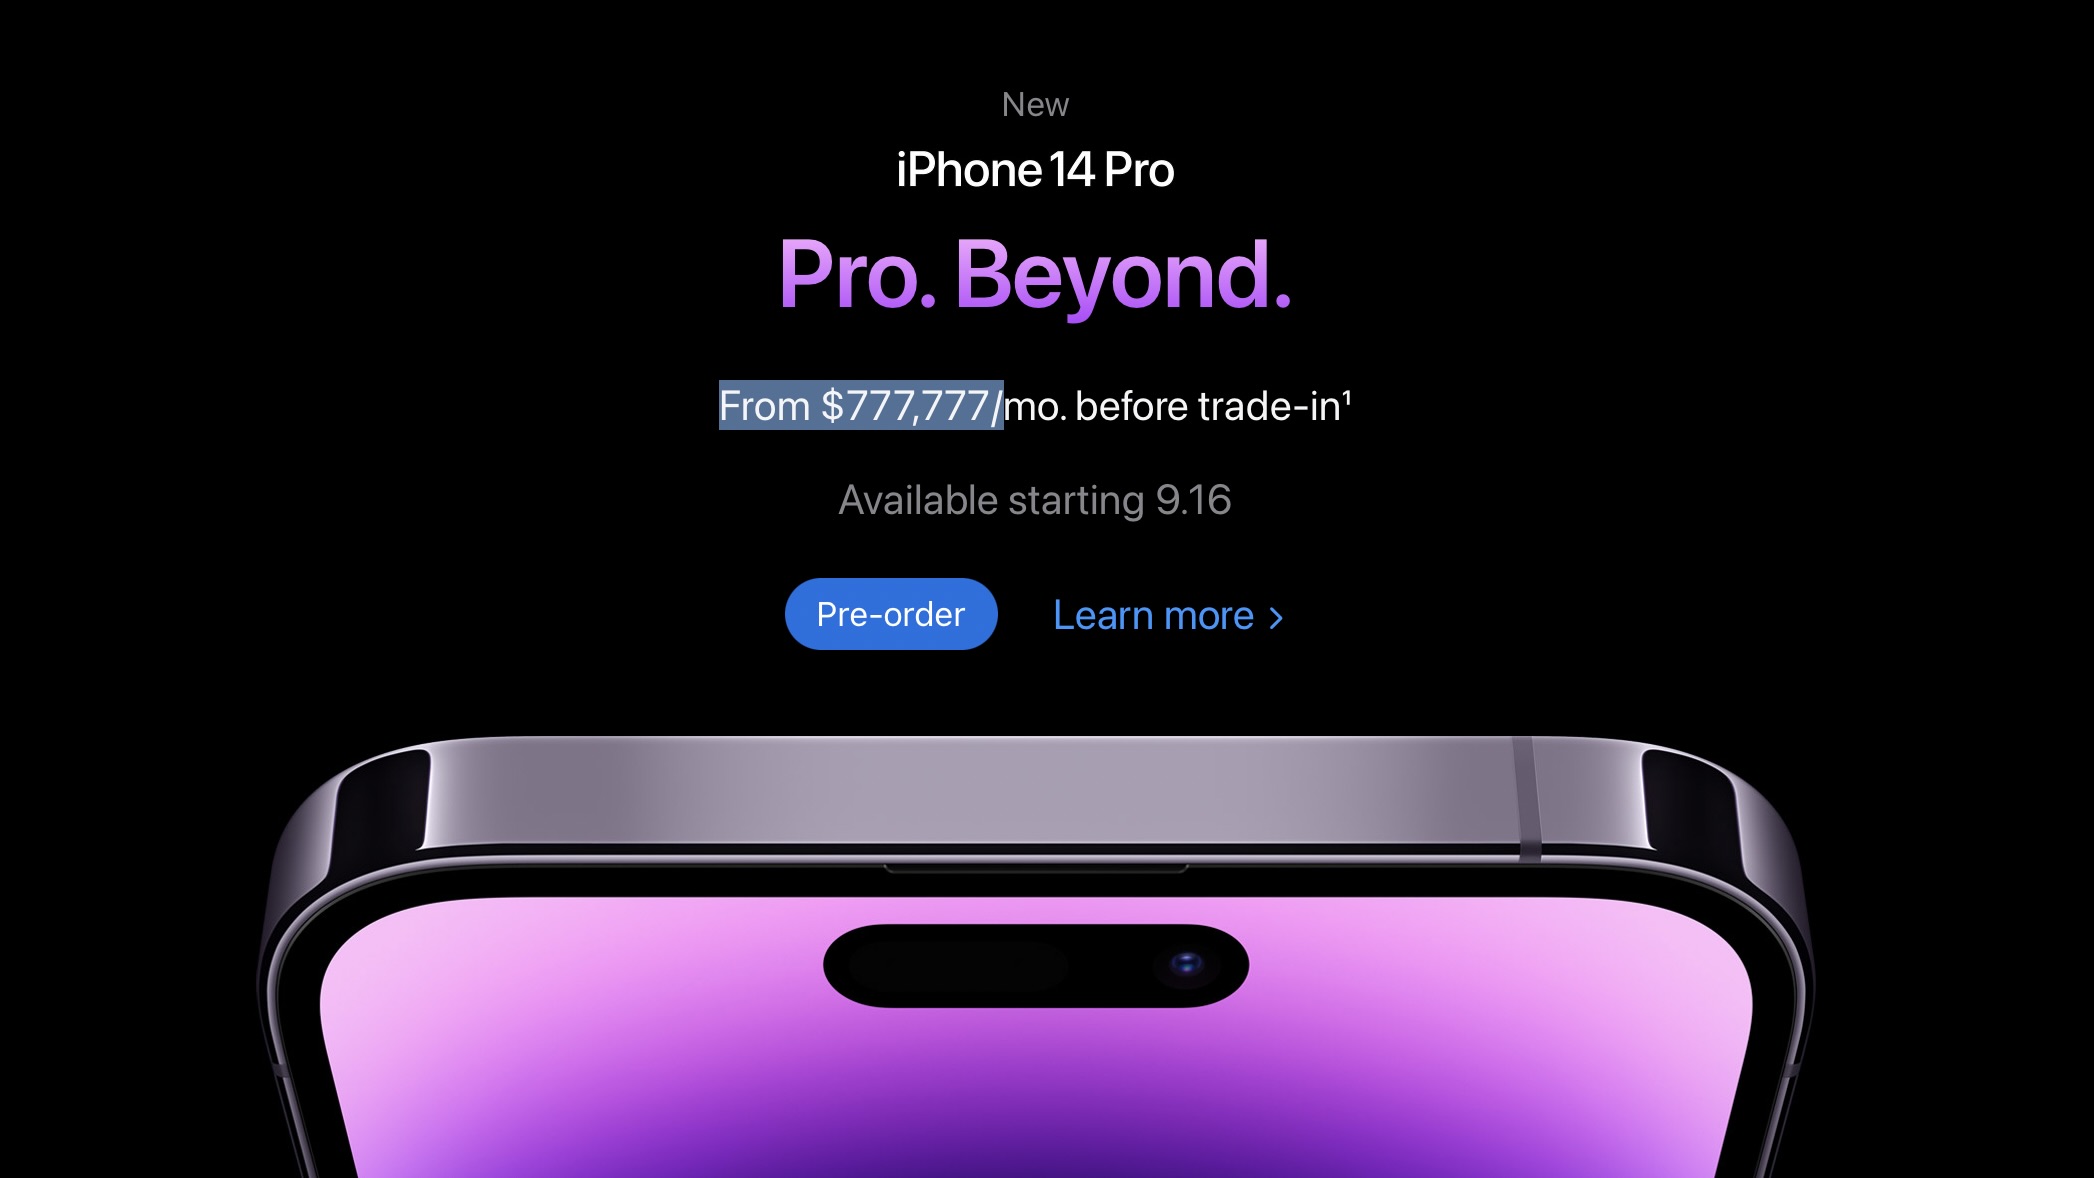 Apple’s Website Erroneously Says Latest iPhone and Apple Watch Costs $777,777 a Month [Update: Fixed]